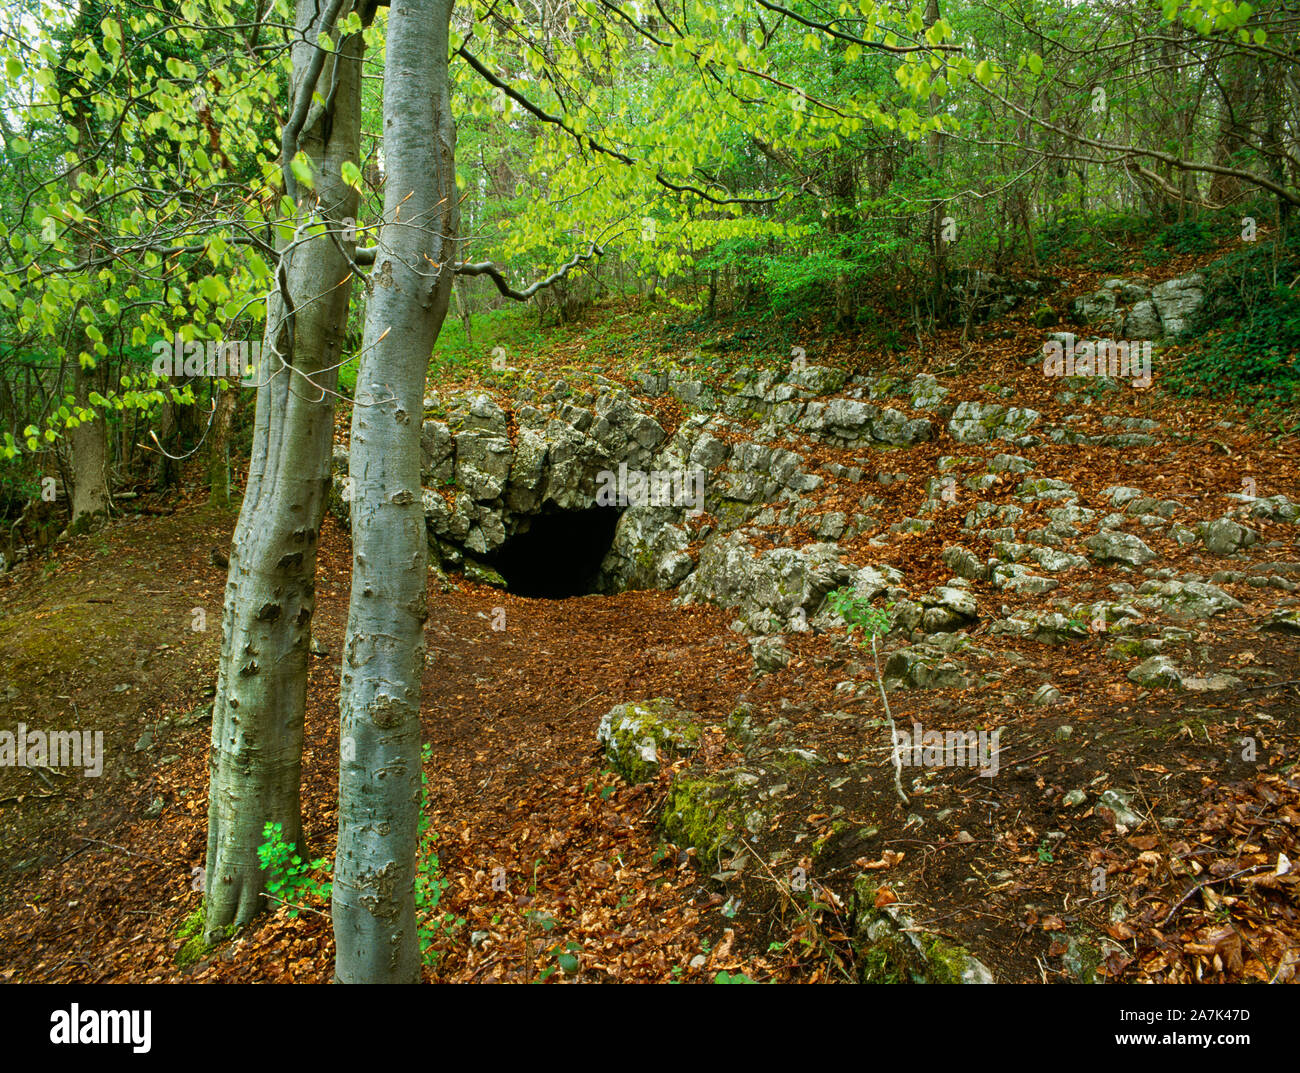 View N of entrance to Big Covert Cave in a limestone outcrop in Big Covert Wood, Llanferres, Denbighshire, Wales, UK: human remains & artefacts found. Stock Photo